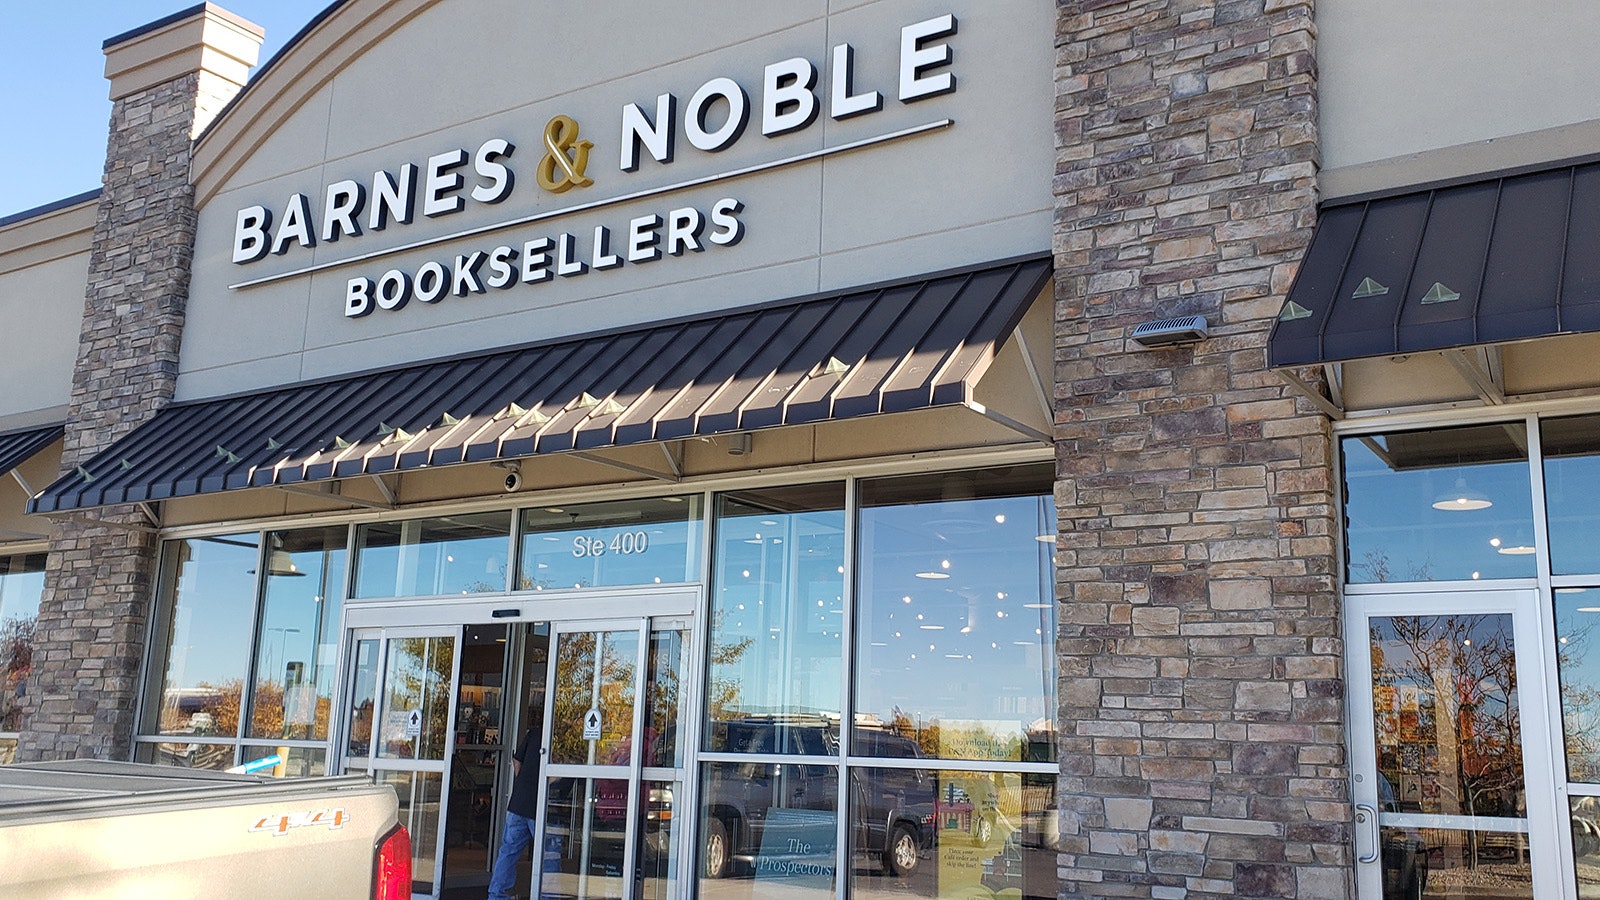 The new Barnes & Noble storefront.